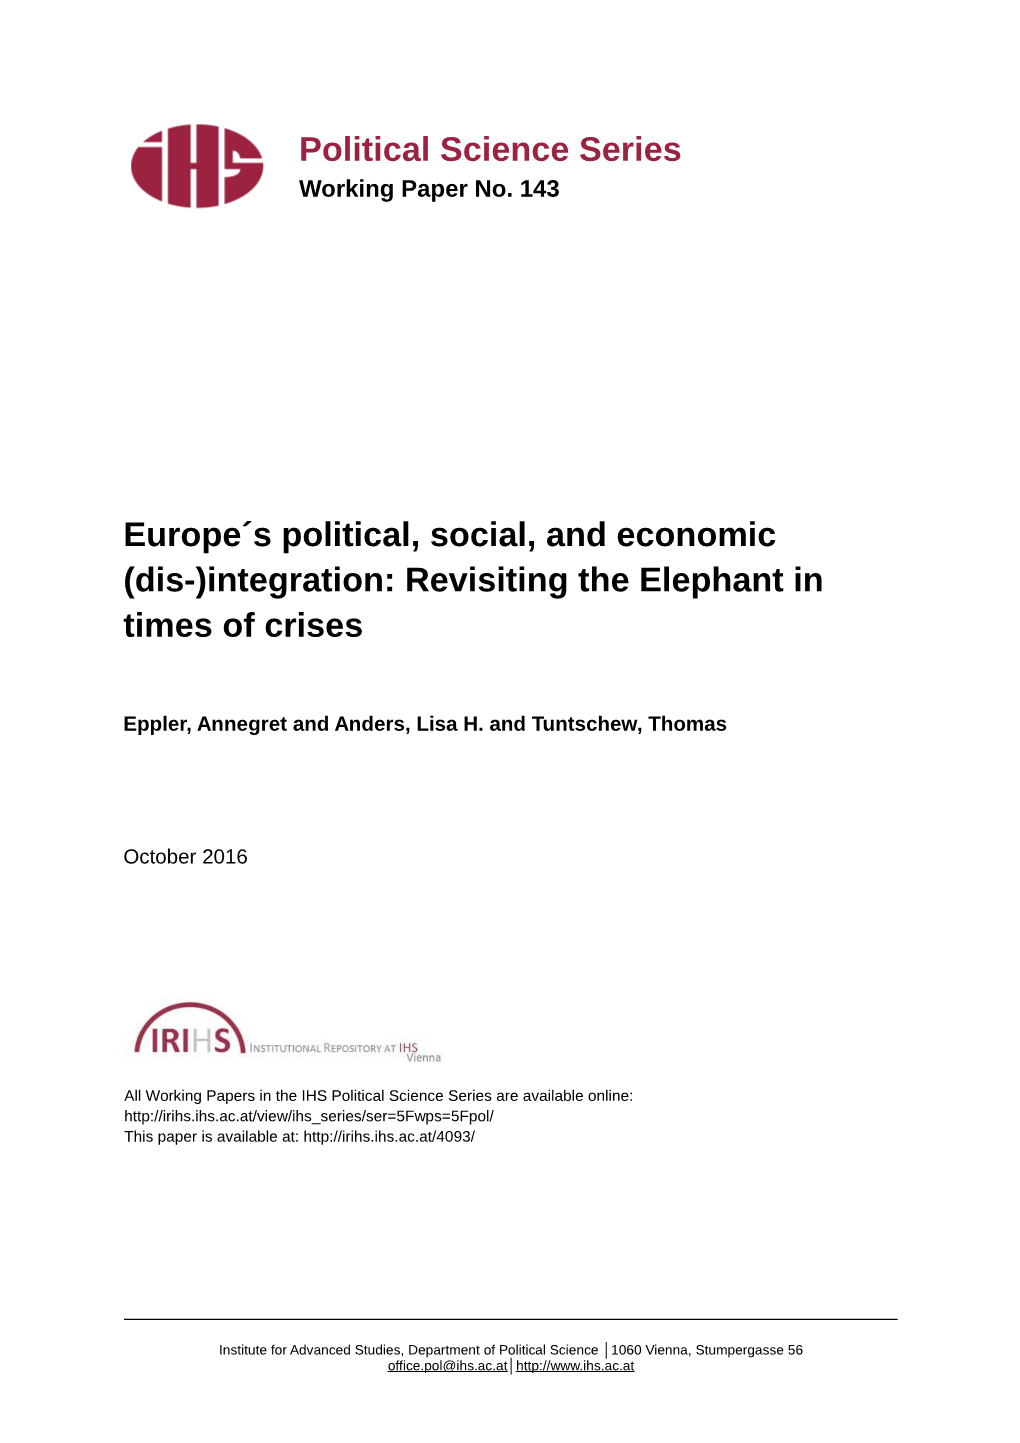 Europe's Political, Social, and Economic (Dis-)Integration: Revisiting the Elephant in Times of Crisis